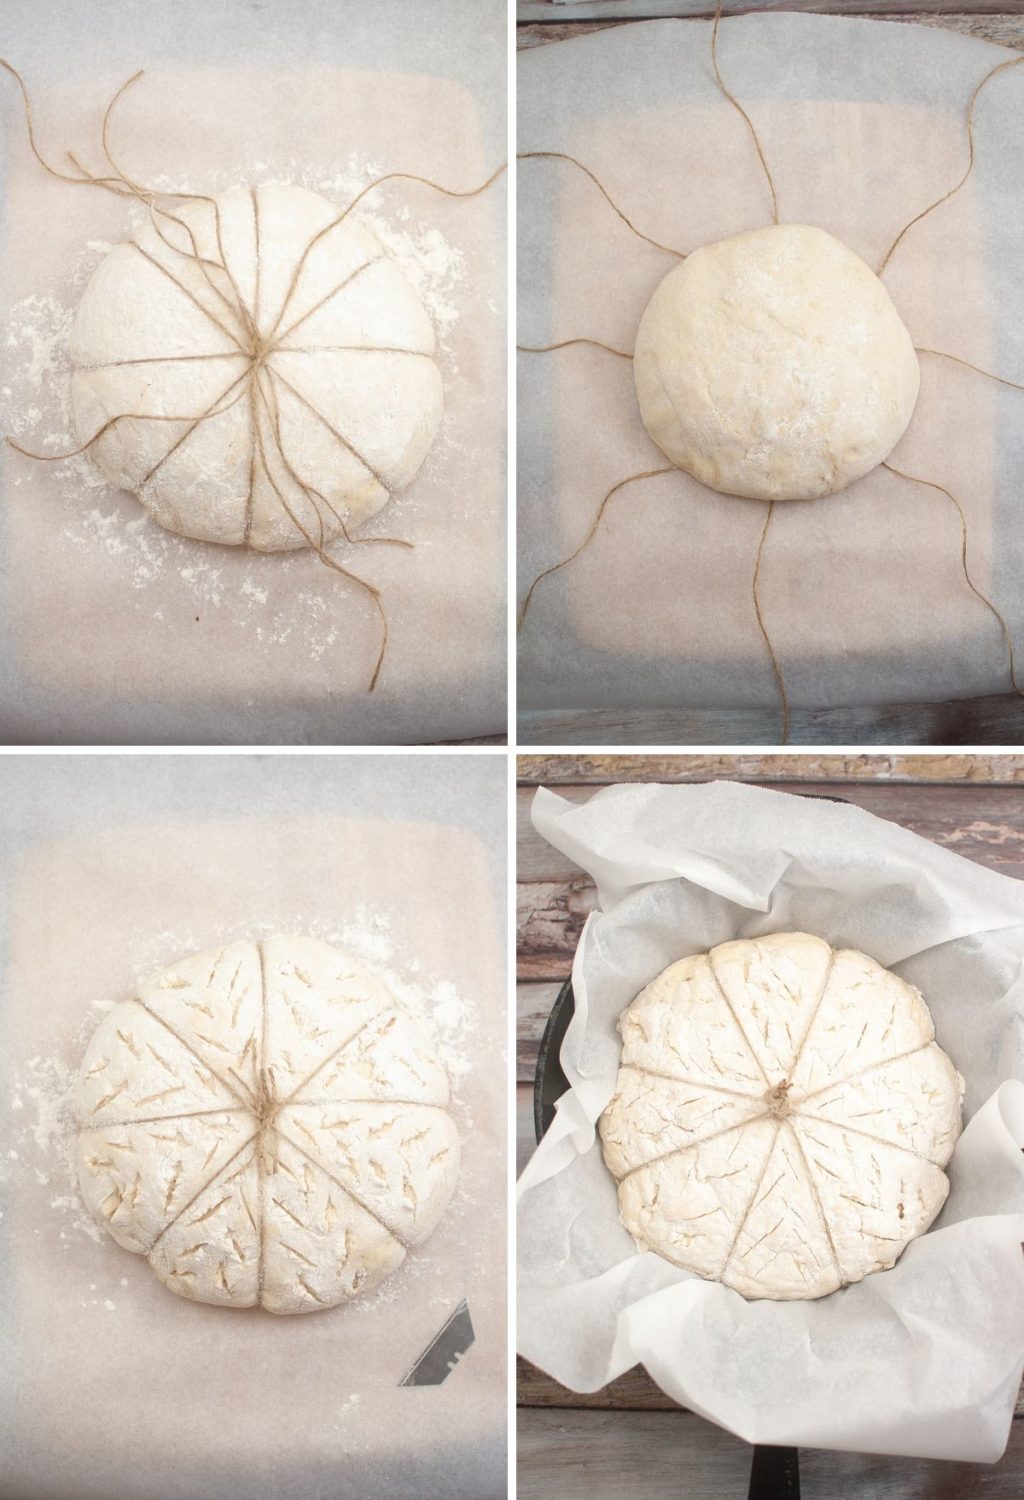 Four pictures showing how to make a loaf of bread.